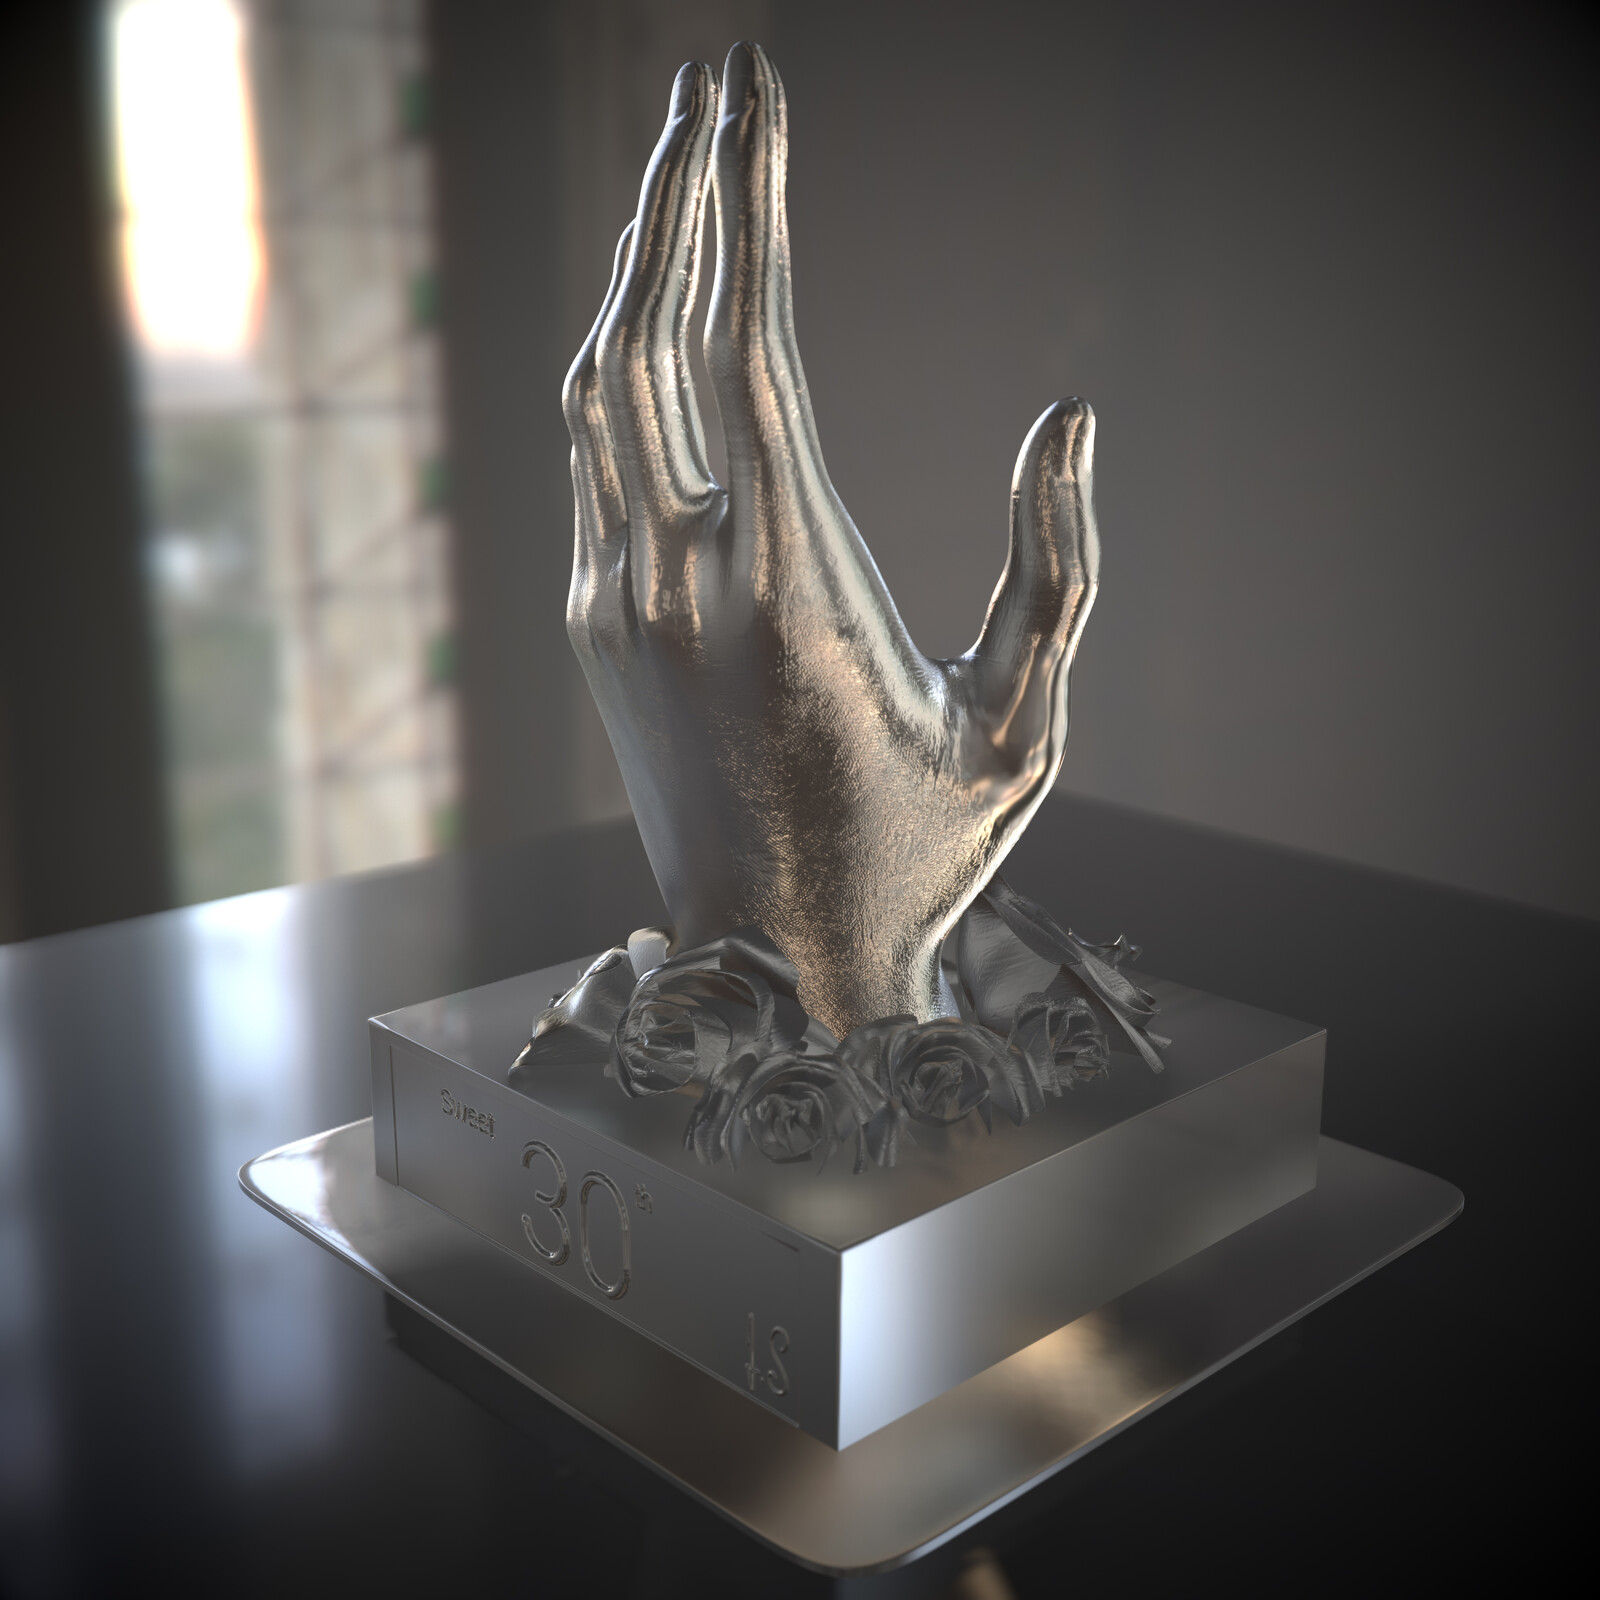 "The hand and flowers" - 3Dprint project